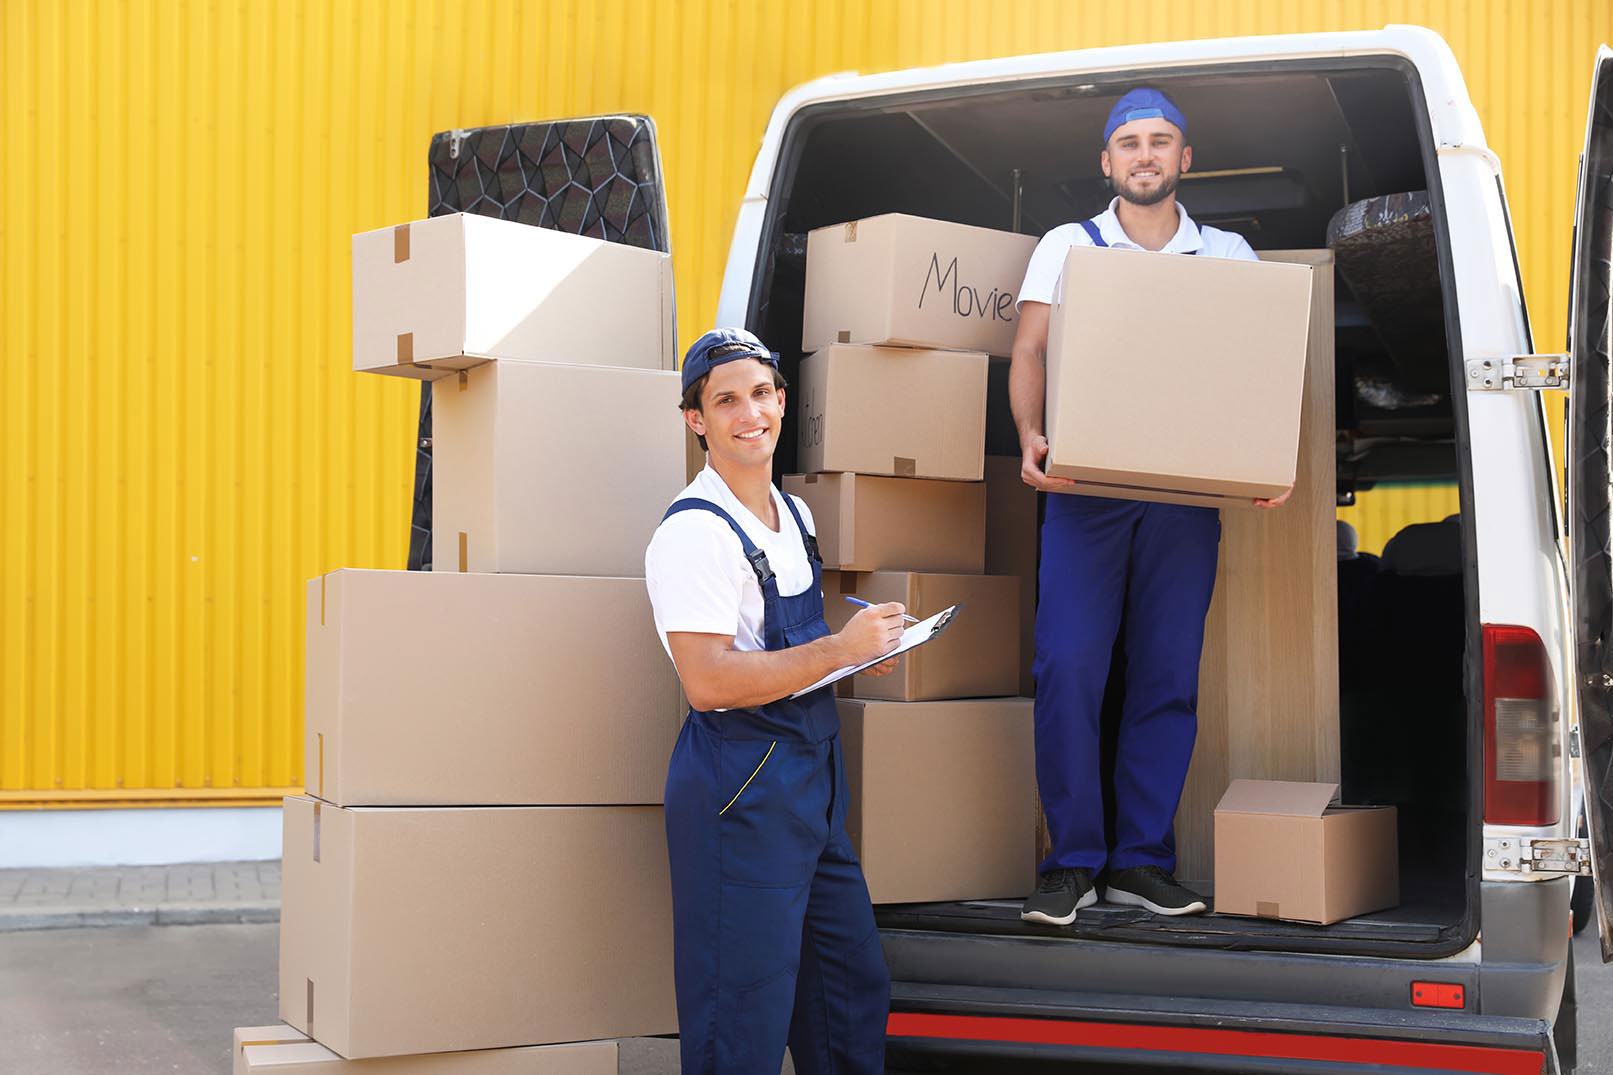 Why Choose Careful Hands Movers?